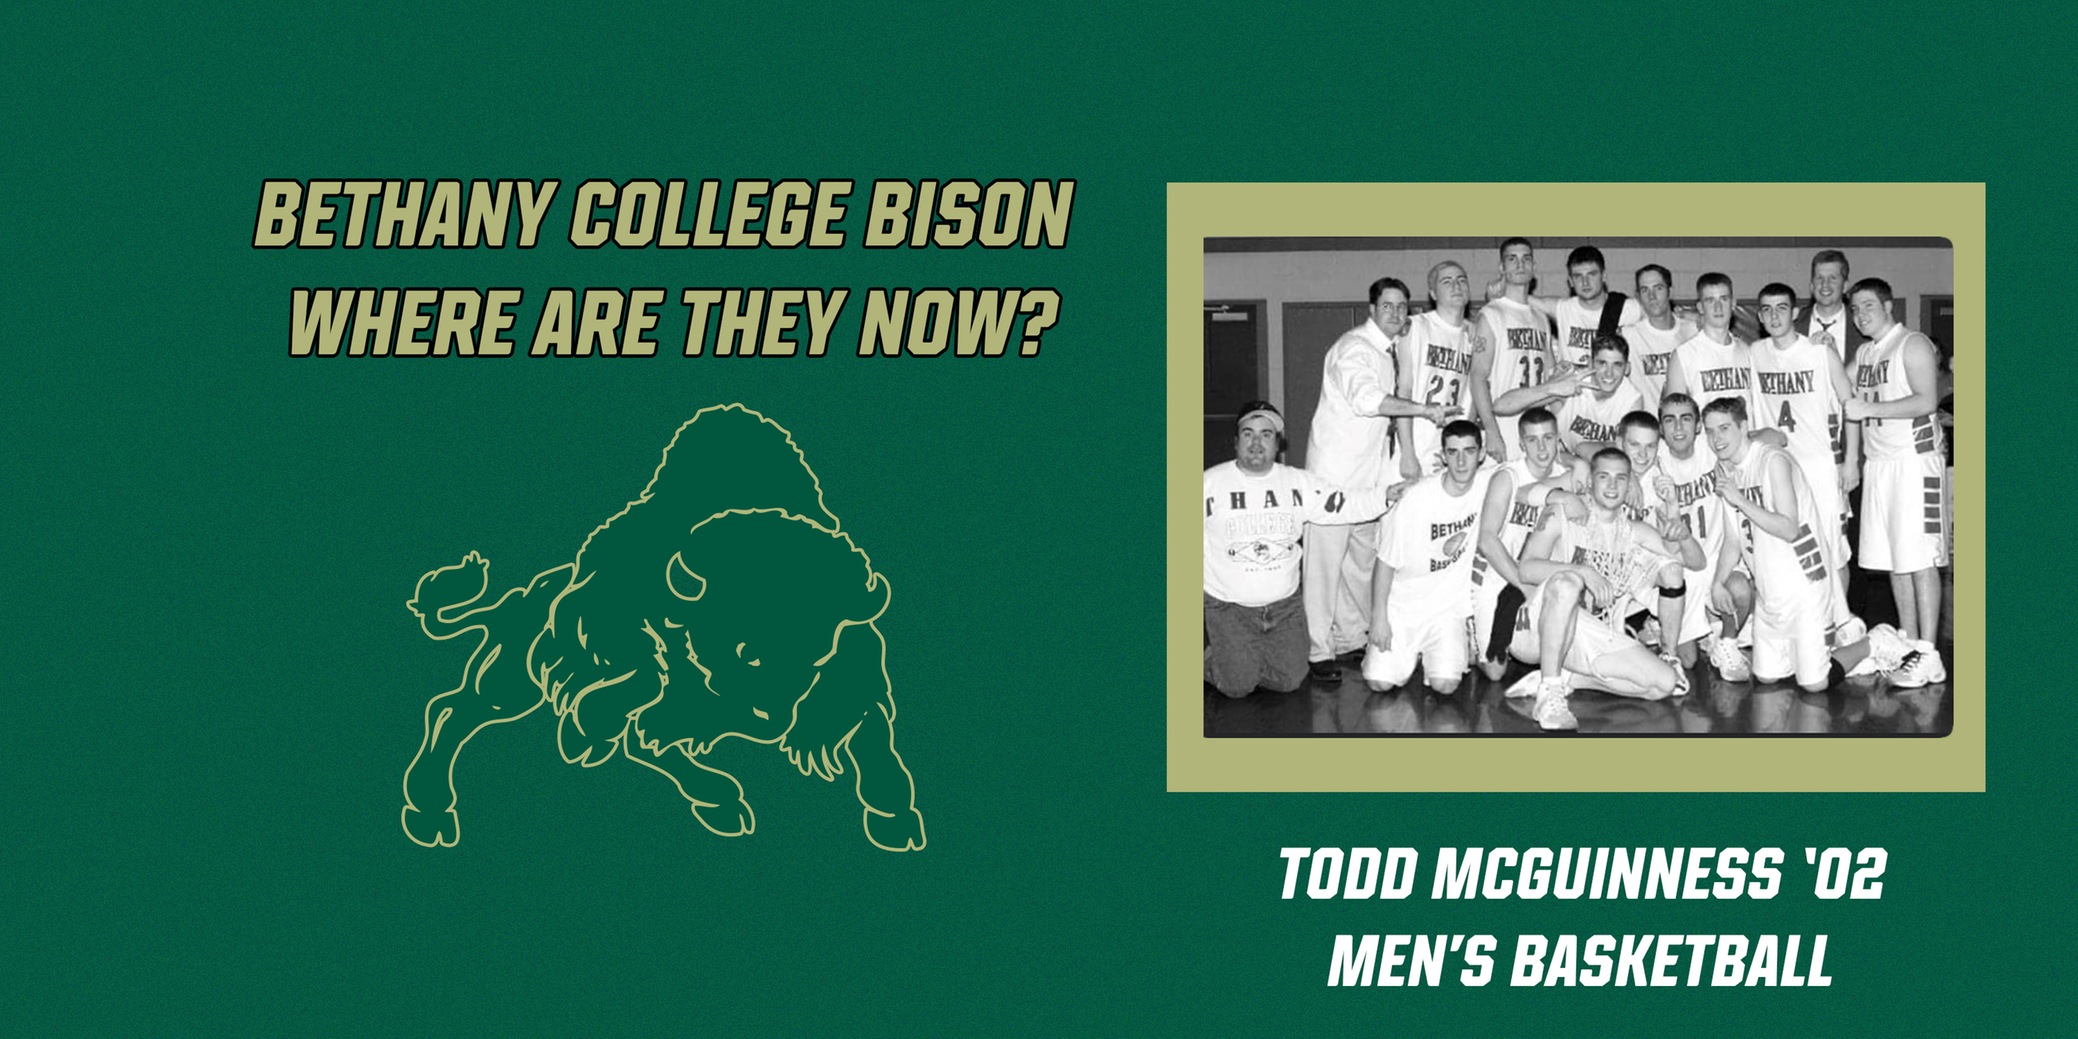 Where Are They Now Series - Todd McGuinness '02, Men's Basketball